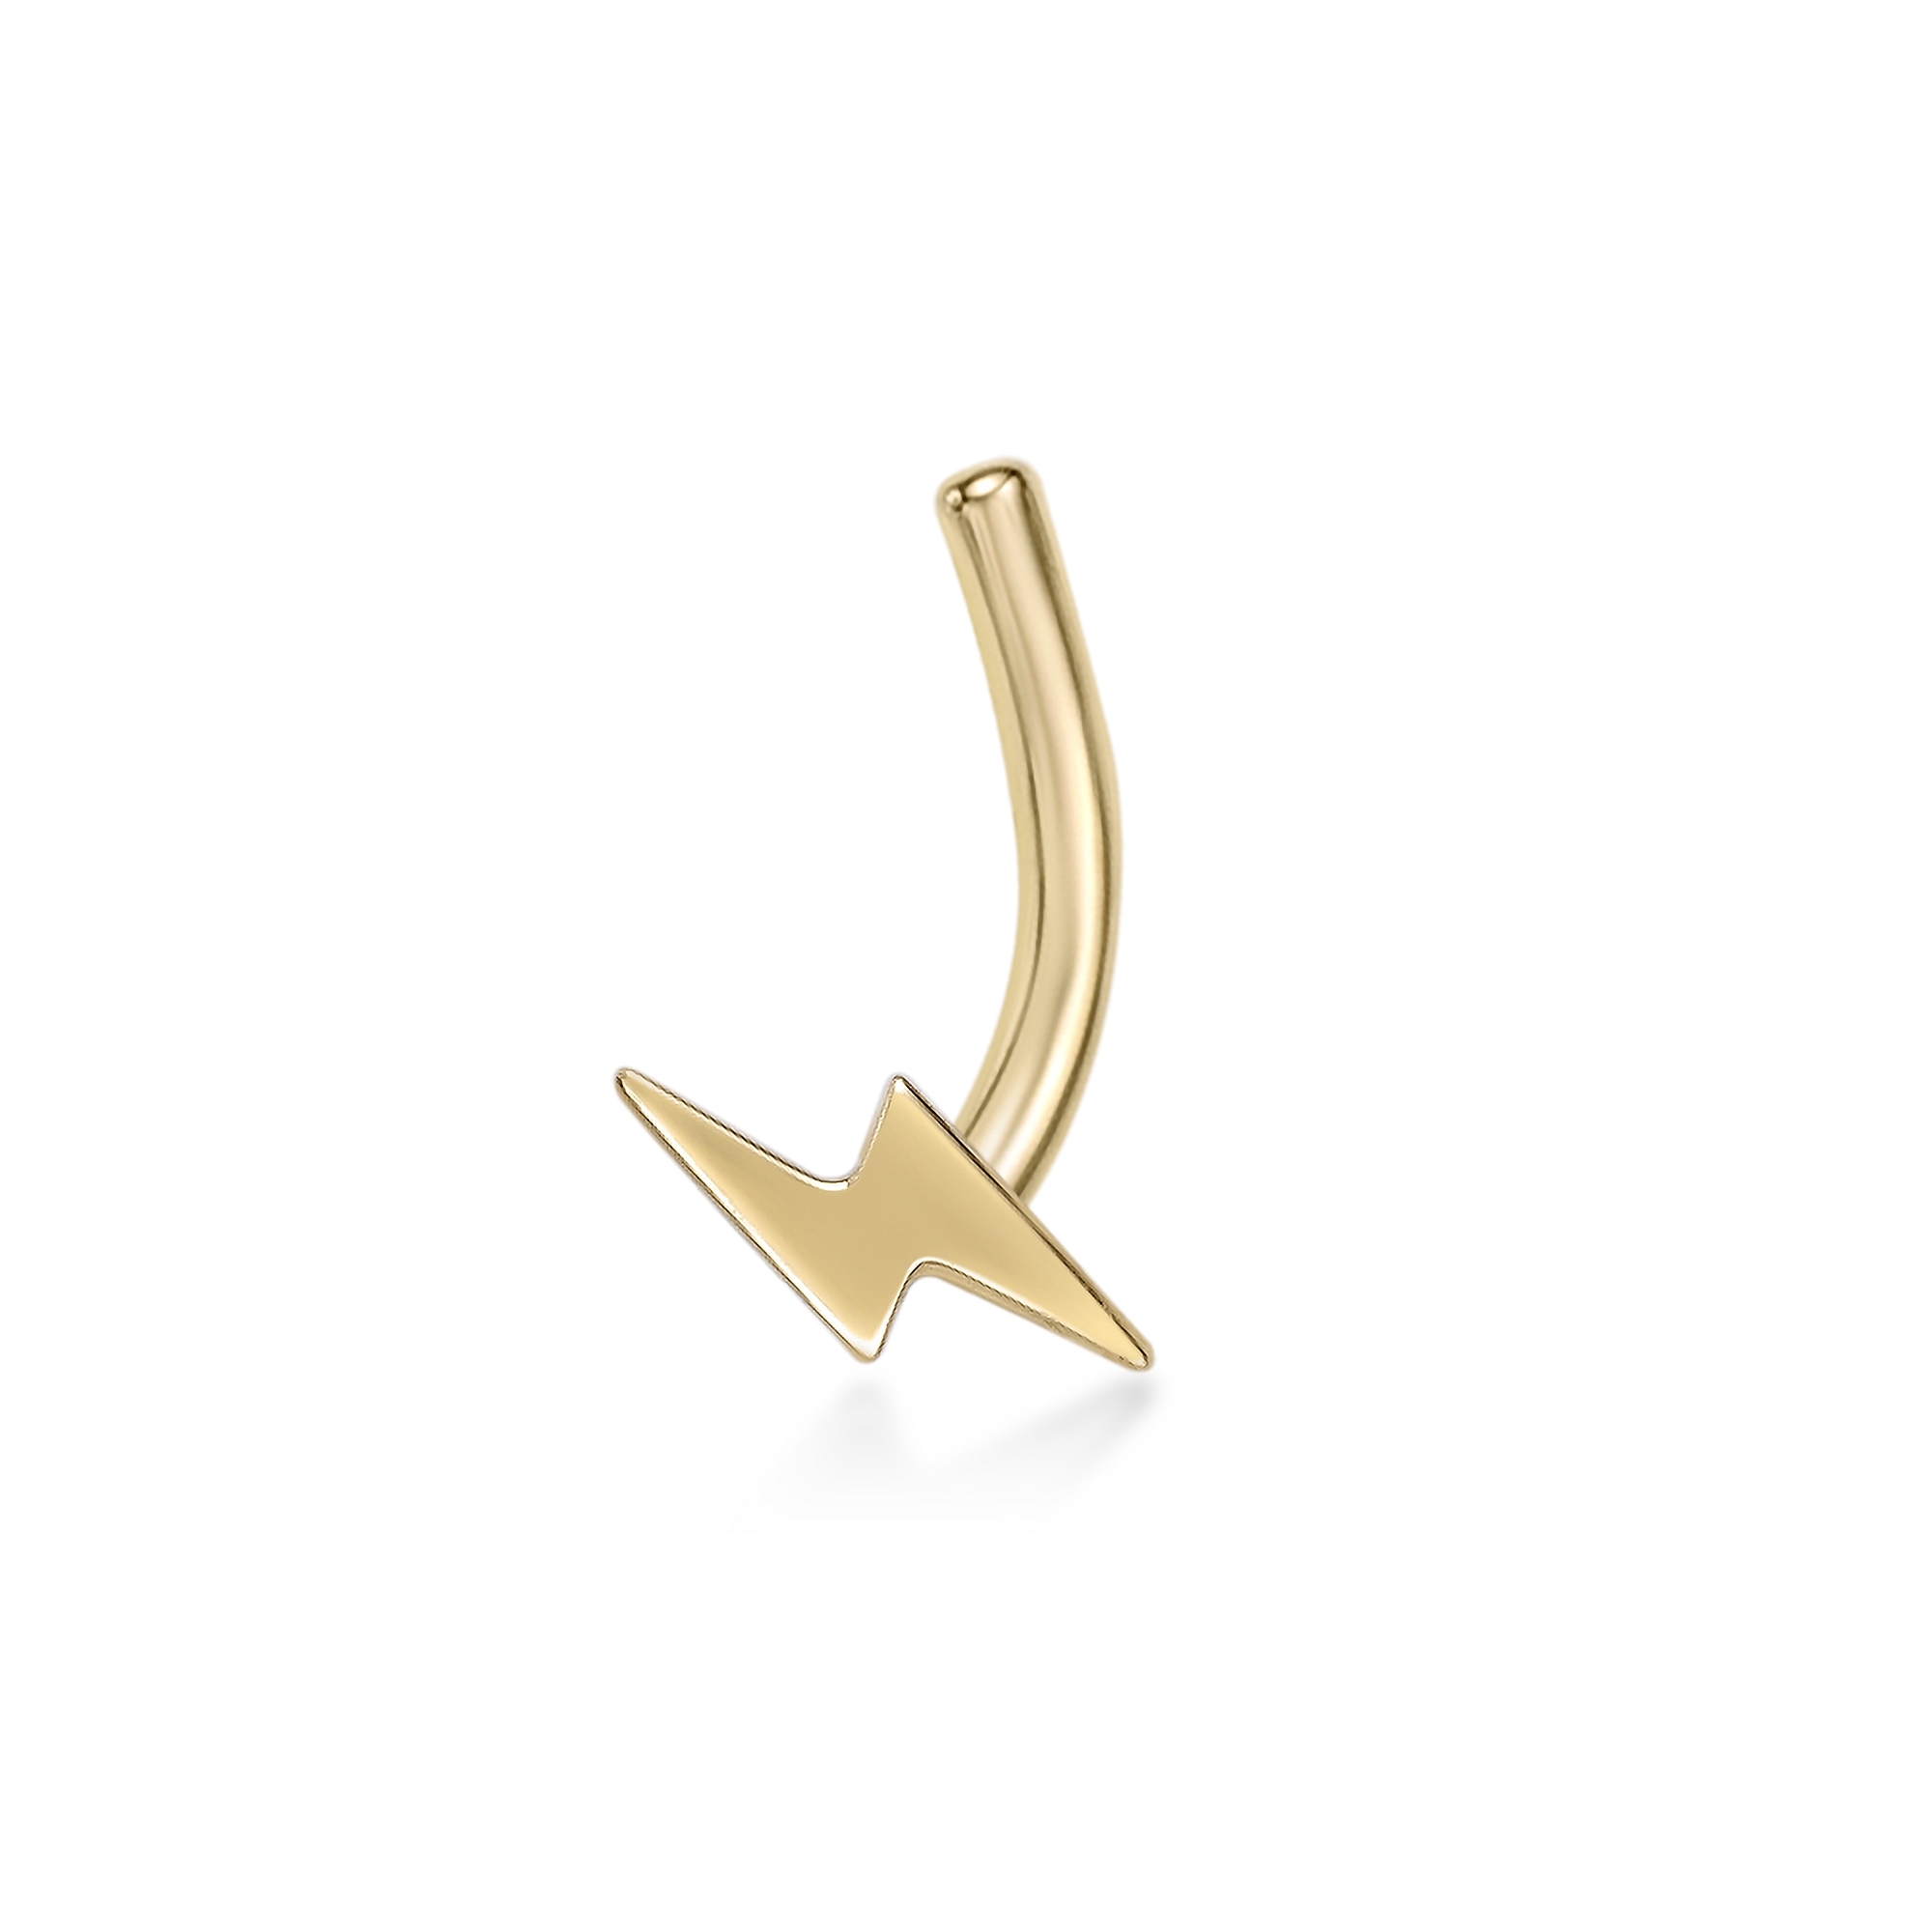 52369-nose-ring-default-collection-yellow-gold-52369.jpg